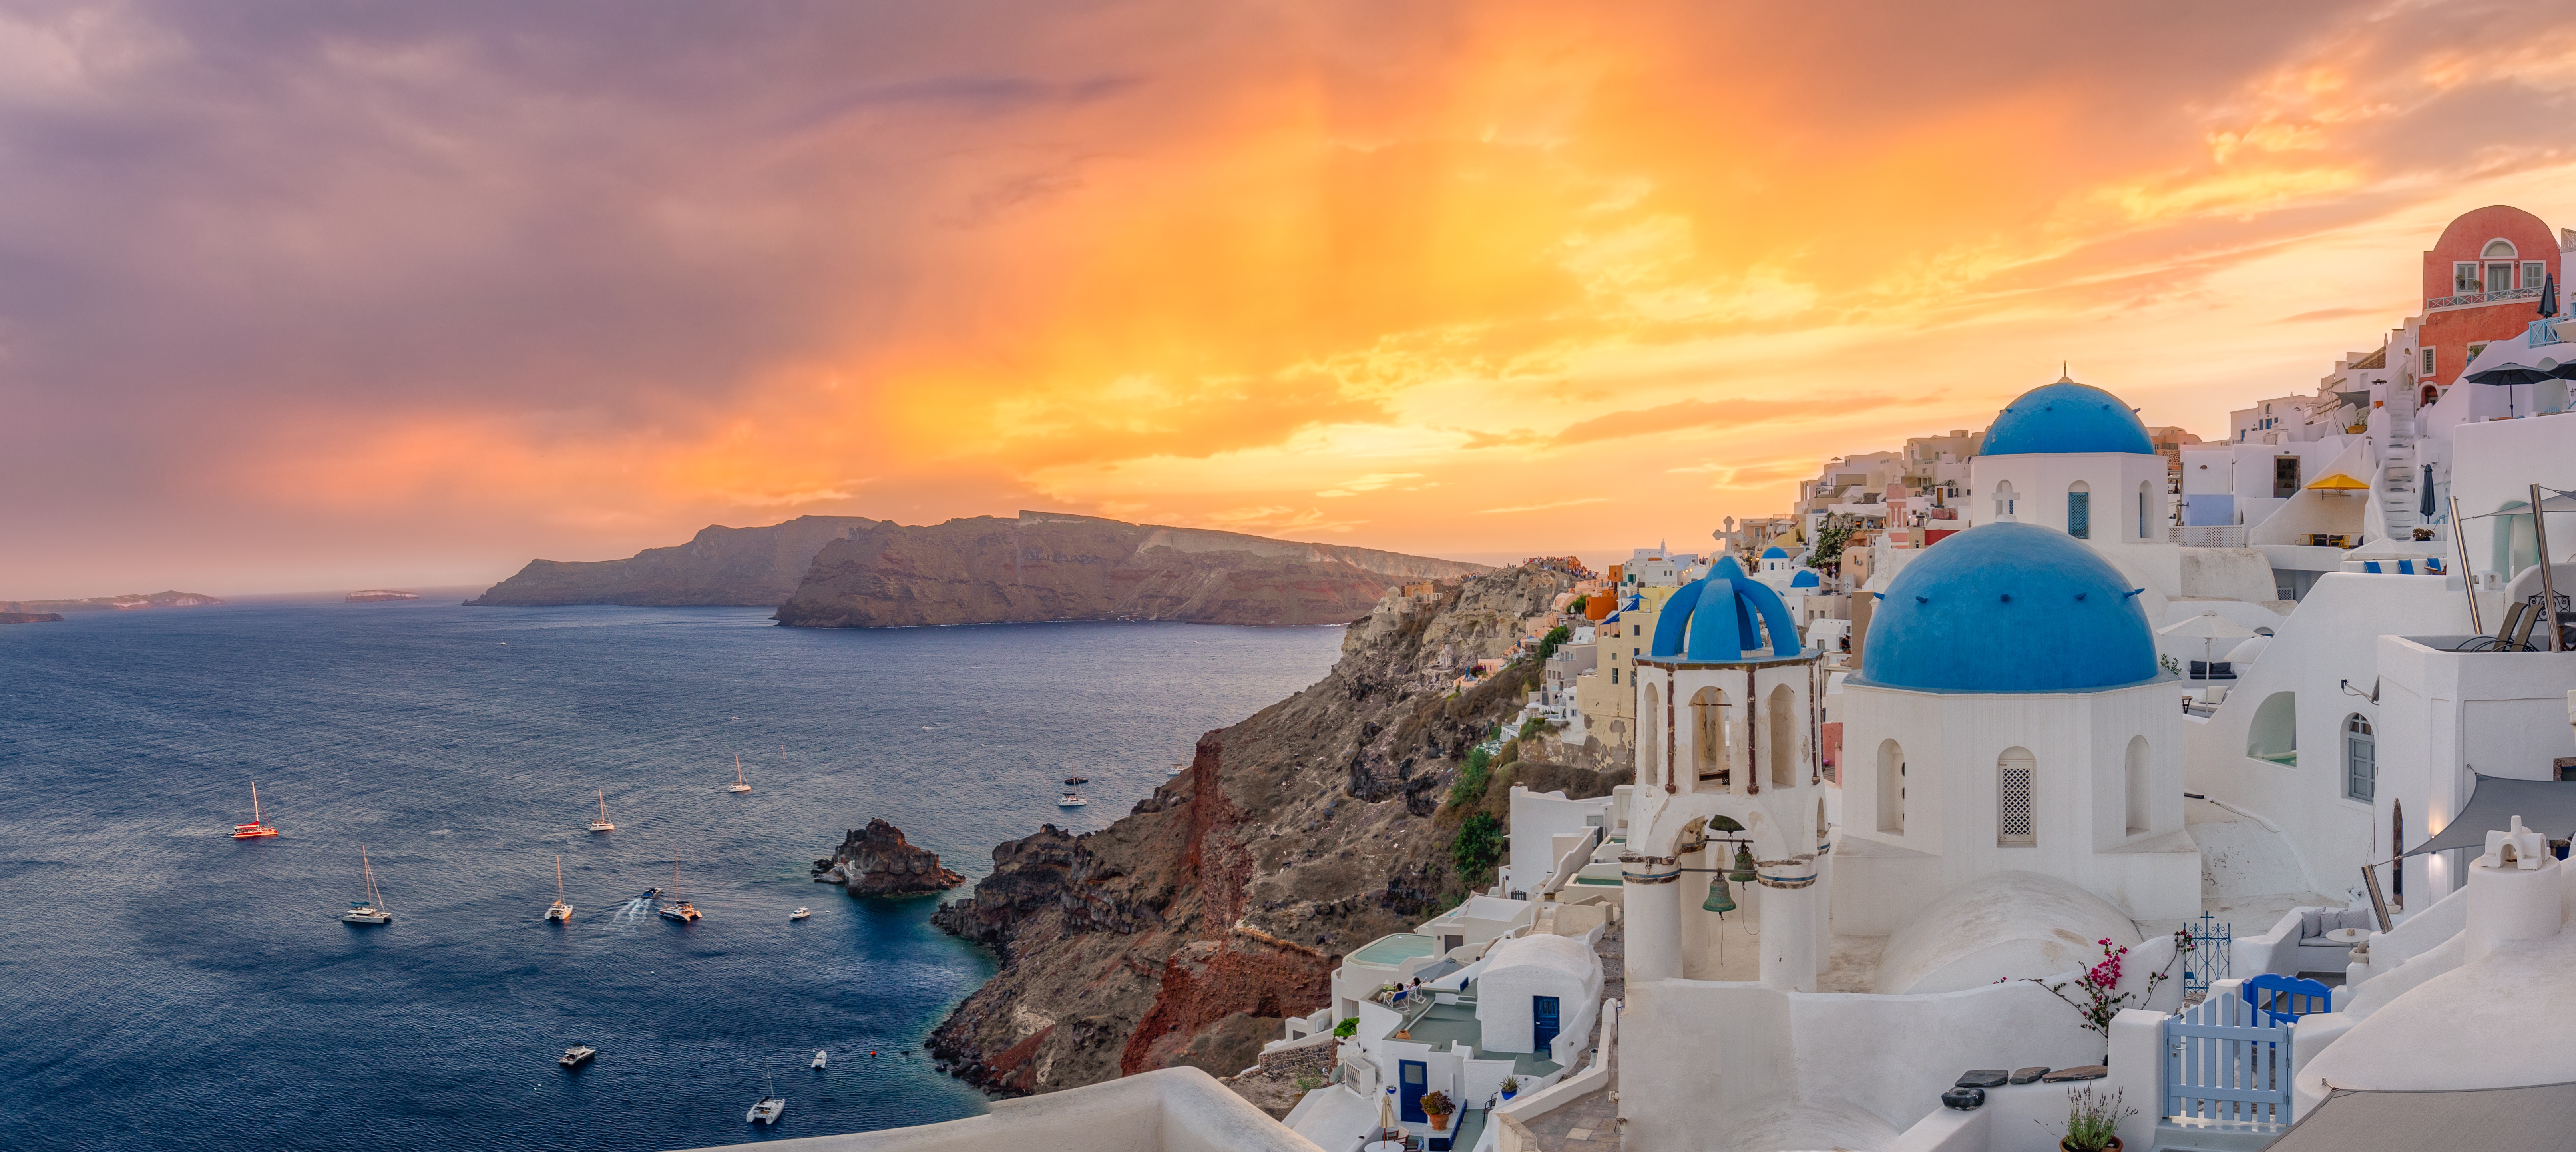 Amazing,Sunset,Panoramic,Landscape,,Luxury,Travel,Vacation.,Oia,Town,On